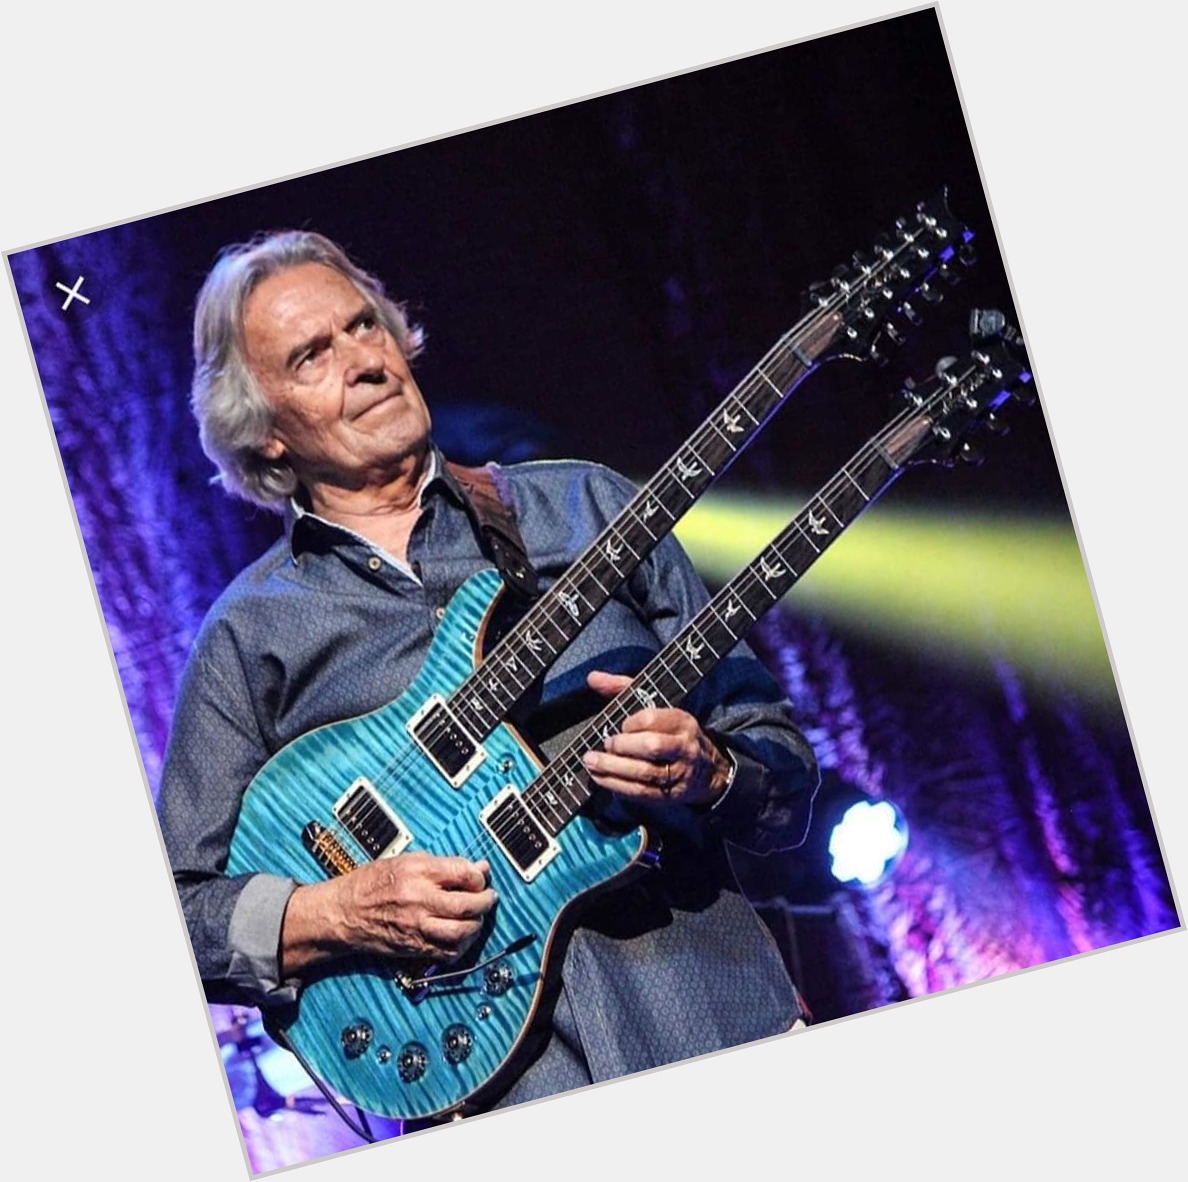 Please join us here at UndercoverIndie in wishing the one and only John McLaughlin a very Happy Birthday today !  